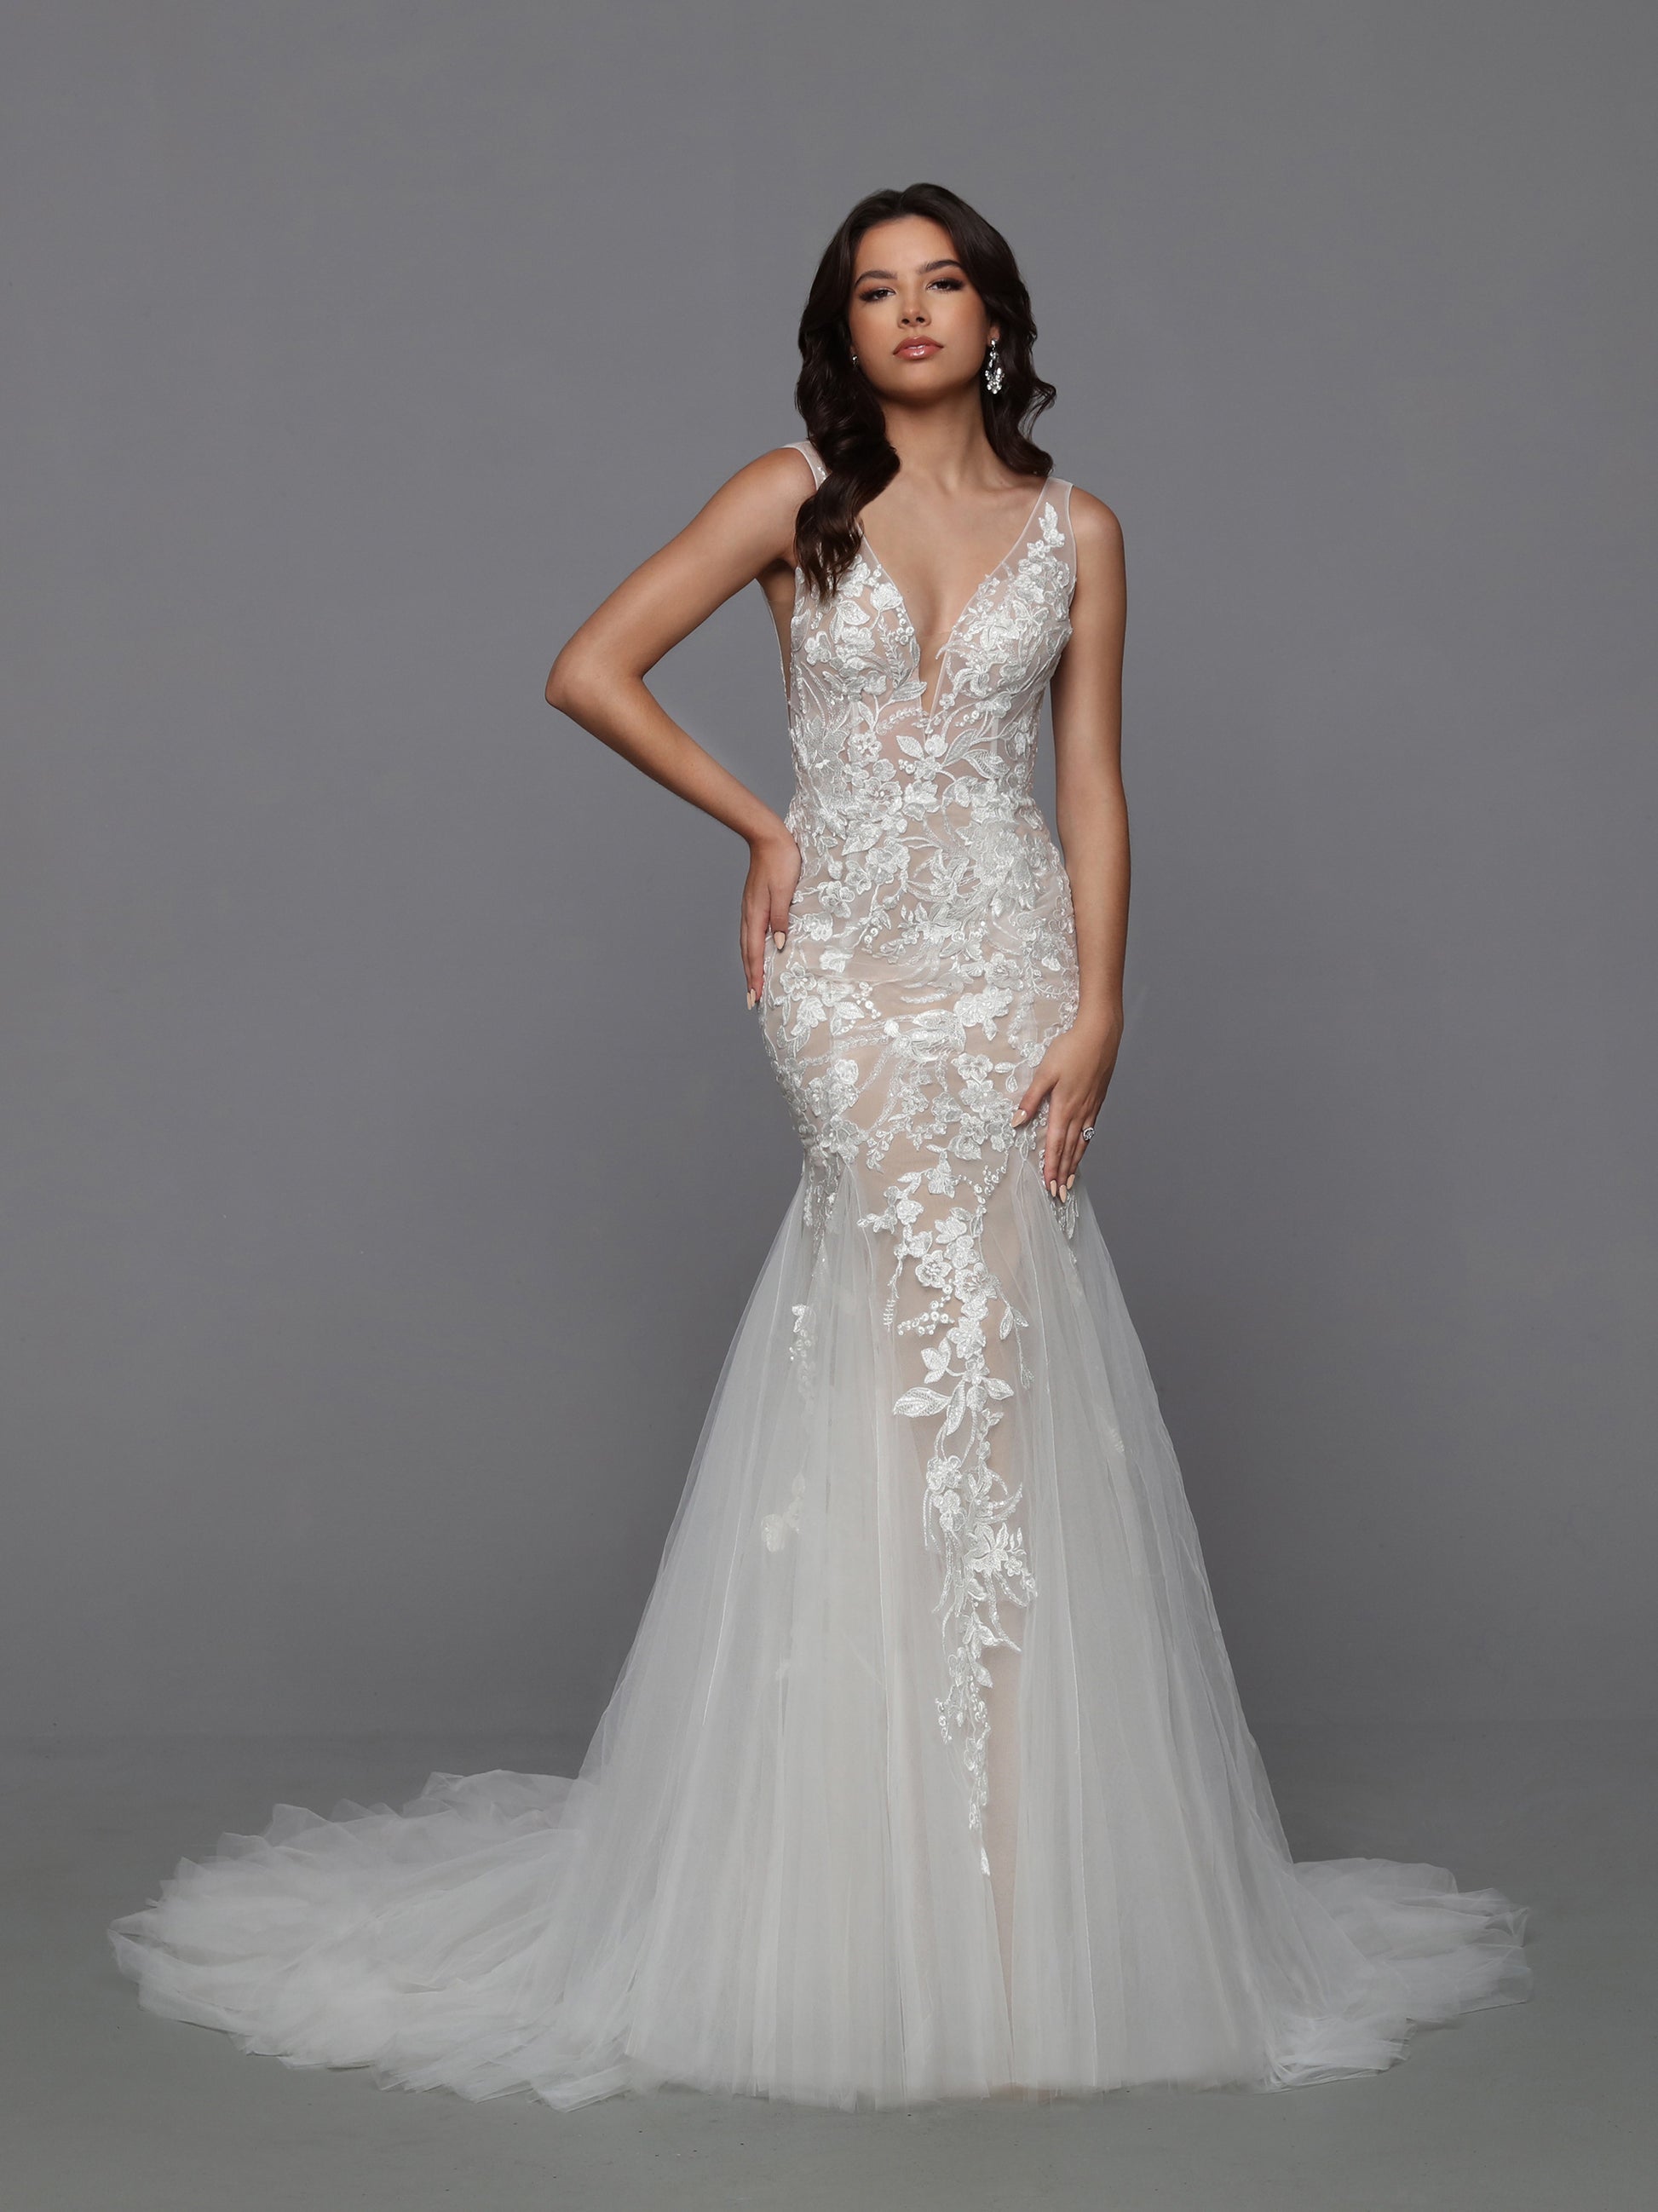 DaVinci Bridal 50765 Mermaid V-Neck Lace Applique Open Back Train Wedding Gown. Designer details of this classic silhouette include the option of a nude-look bodice with latte lining and gorgeous lace applique tracing the lines of the fluffy mermaid skirt.